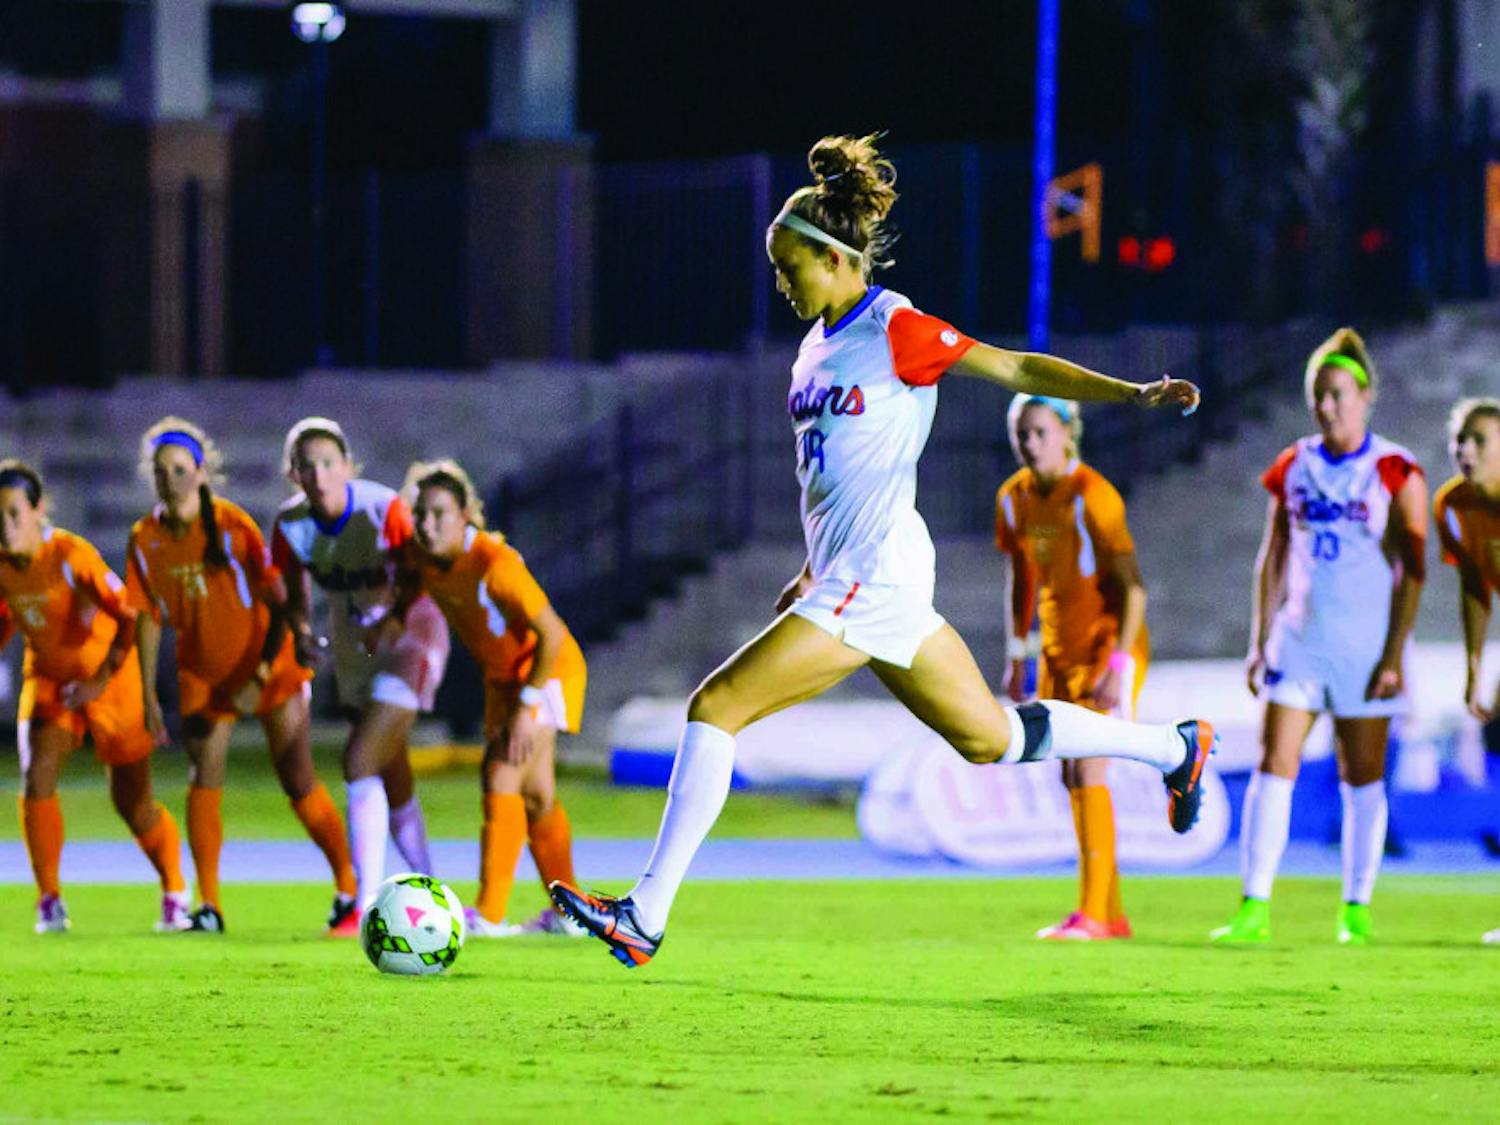 Havana Solaun dribbles the ball during UF's 3-1 win against Tennessee on Friday.